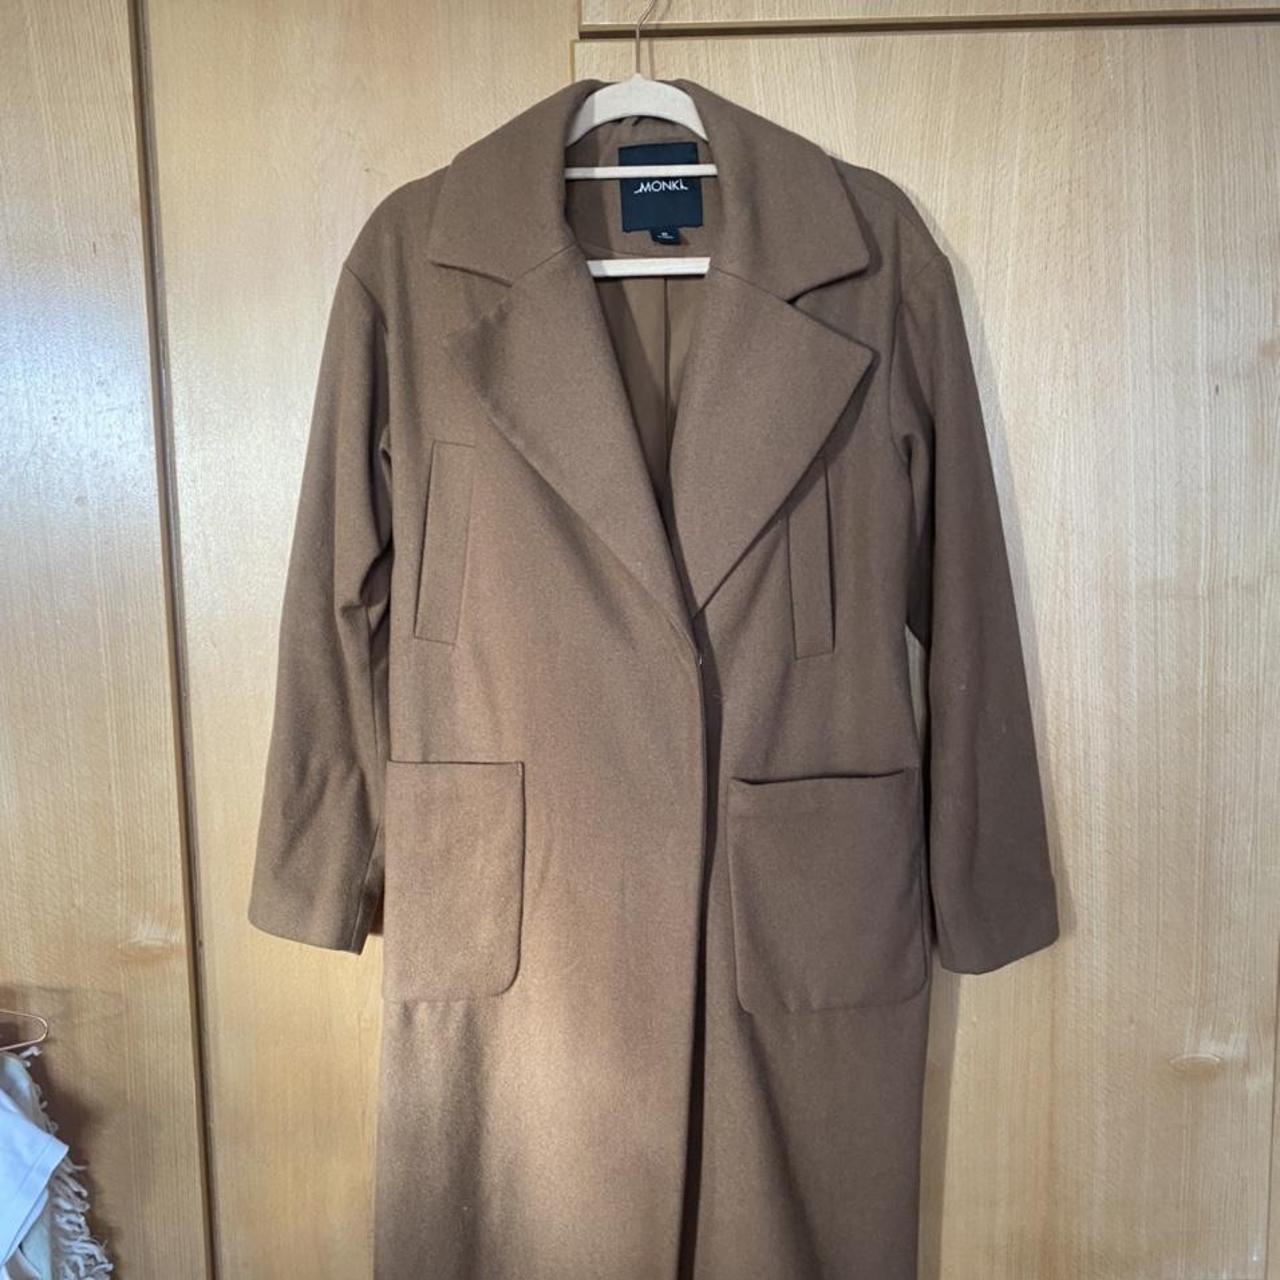 MONKI long camel coat! a really classy piece which... - Depop